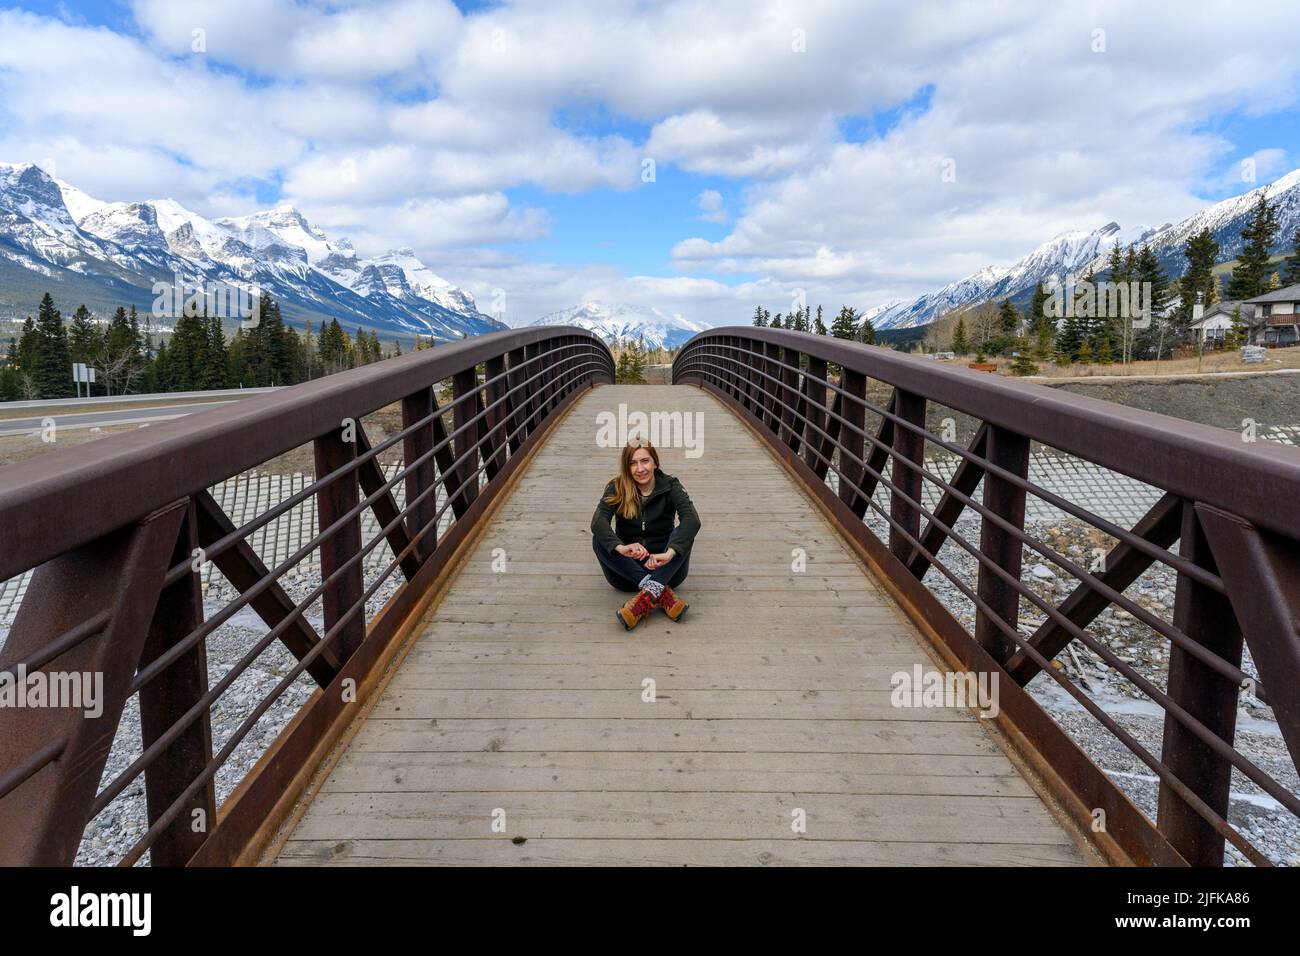 A Middle Aged Woman Sitting In The Middle Of A Wood Pedestrian Bridge